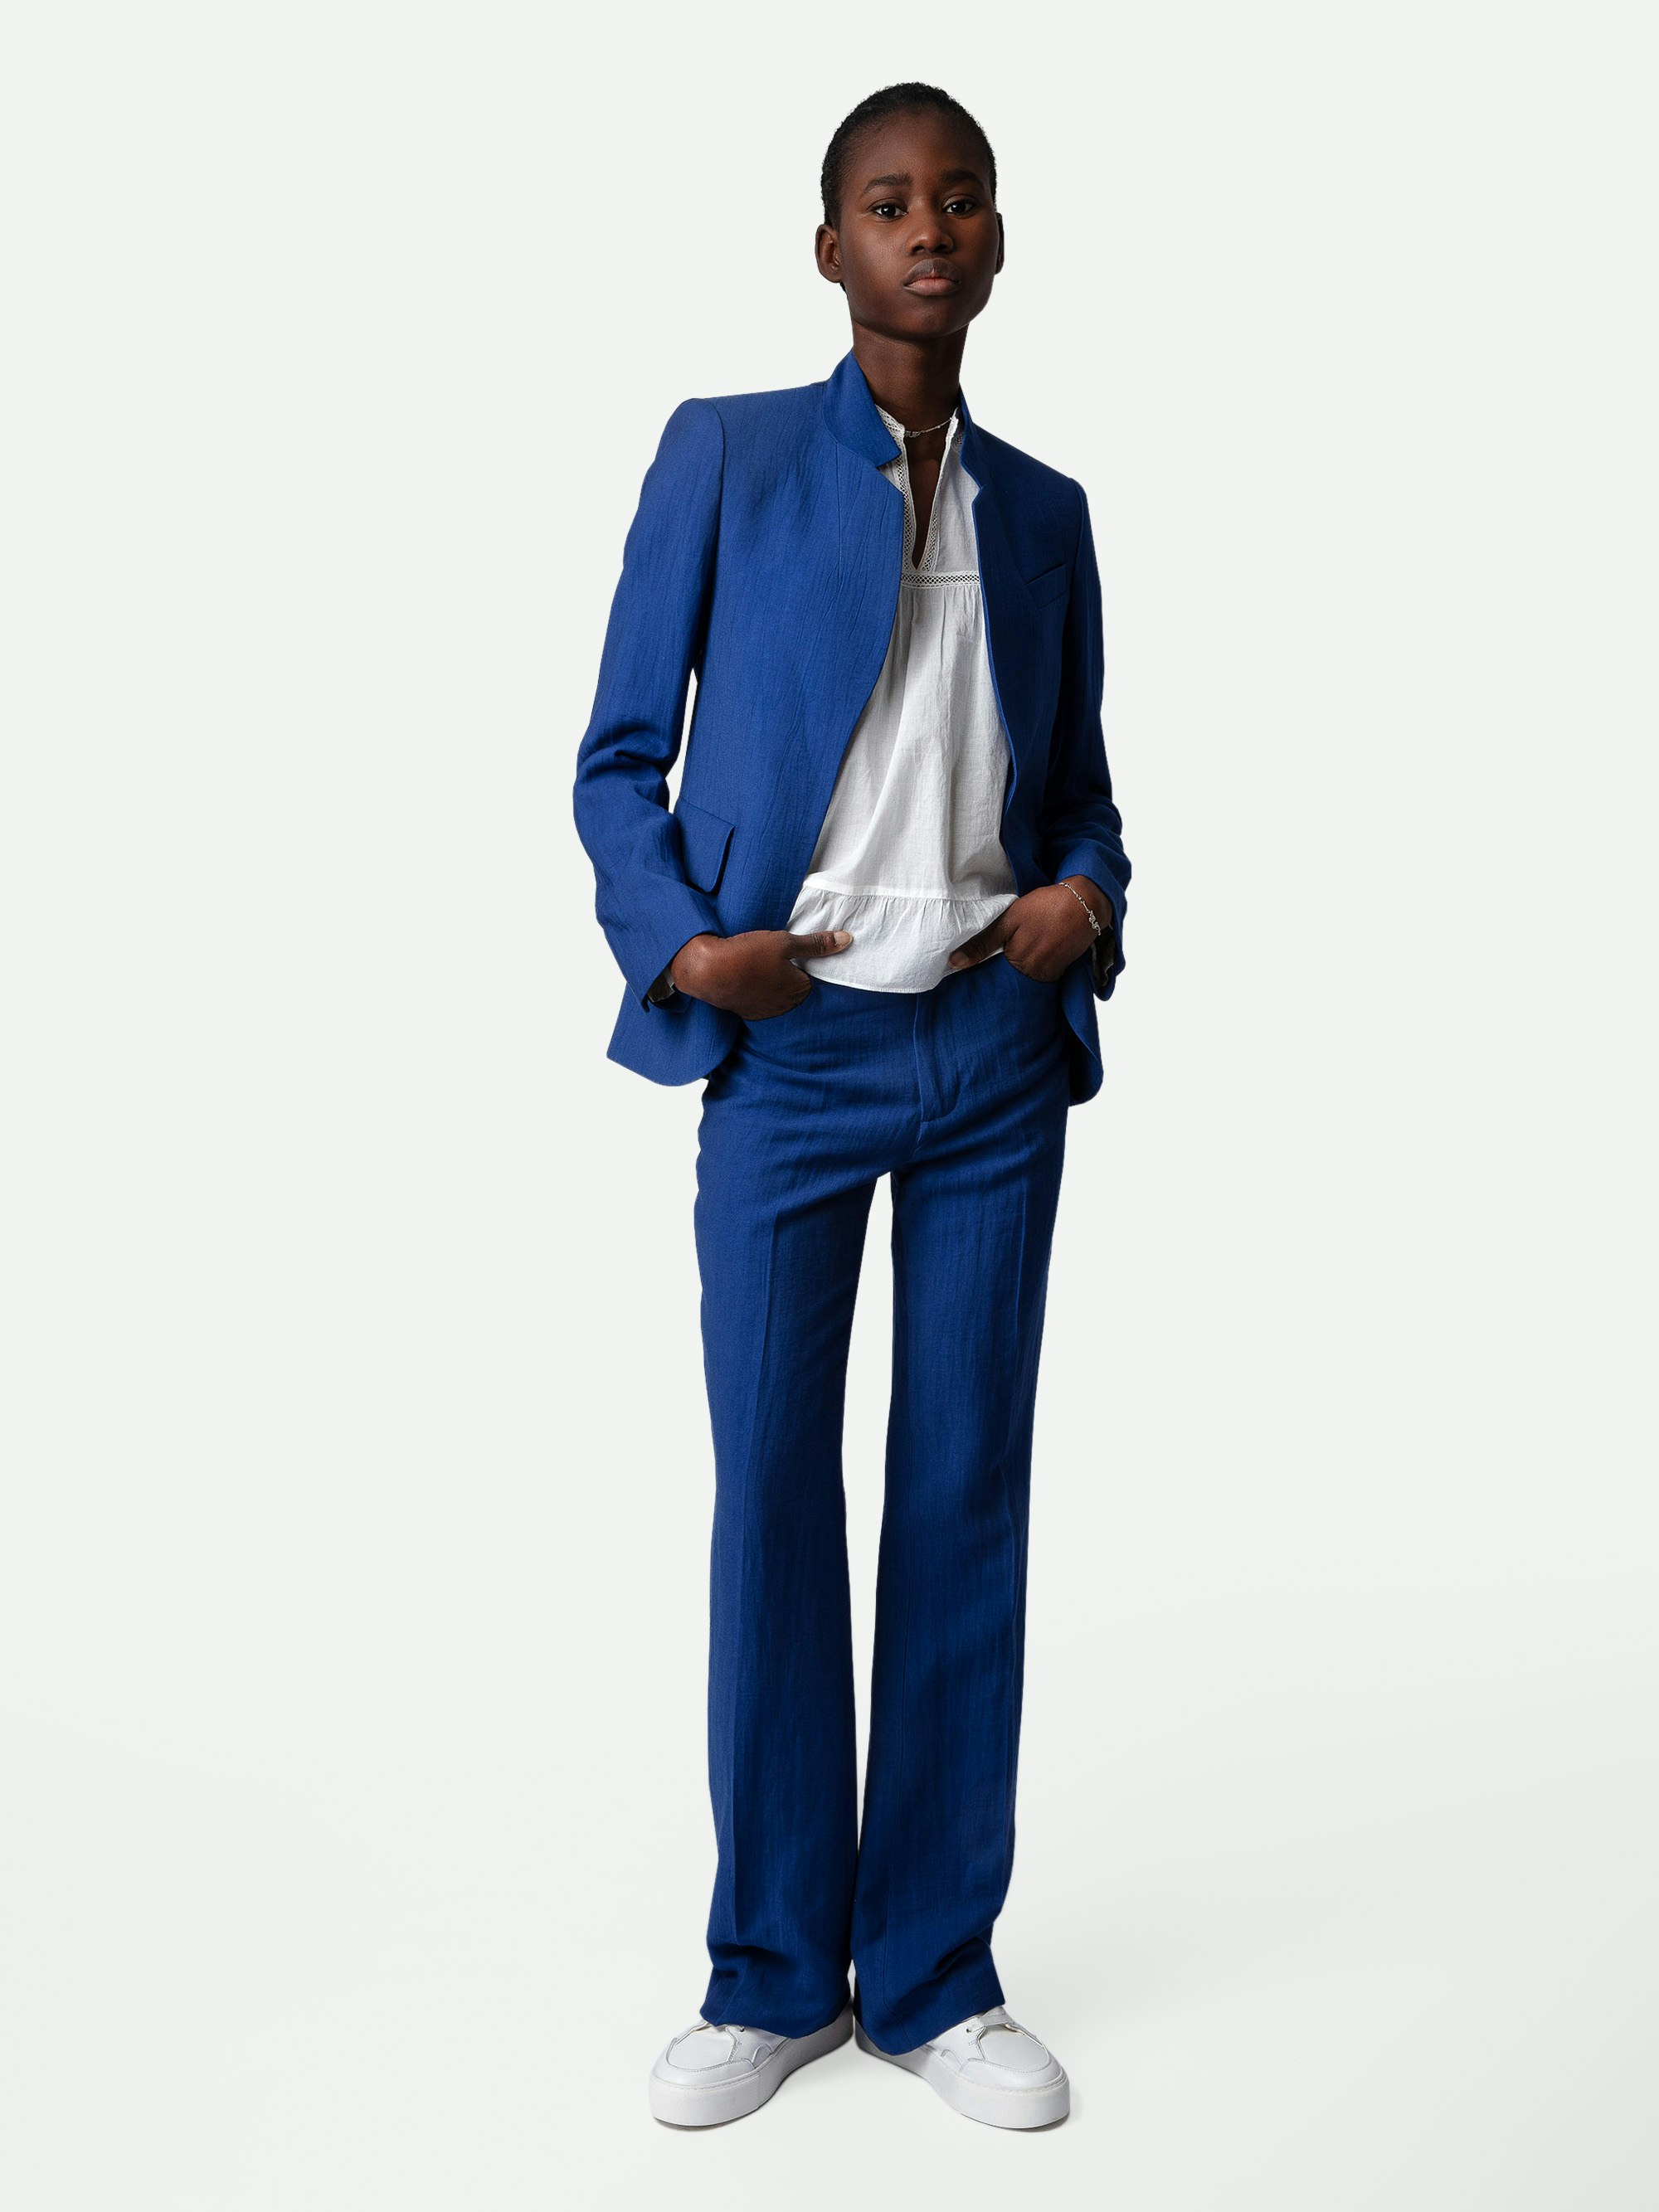 Pistol Trousers - Blue linen flared tailored trousers with pockets and pleats.